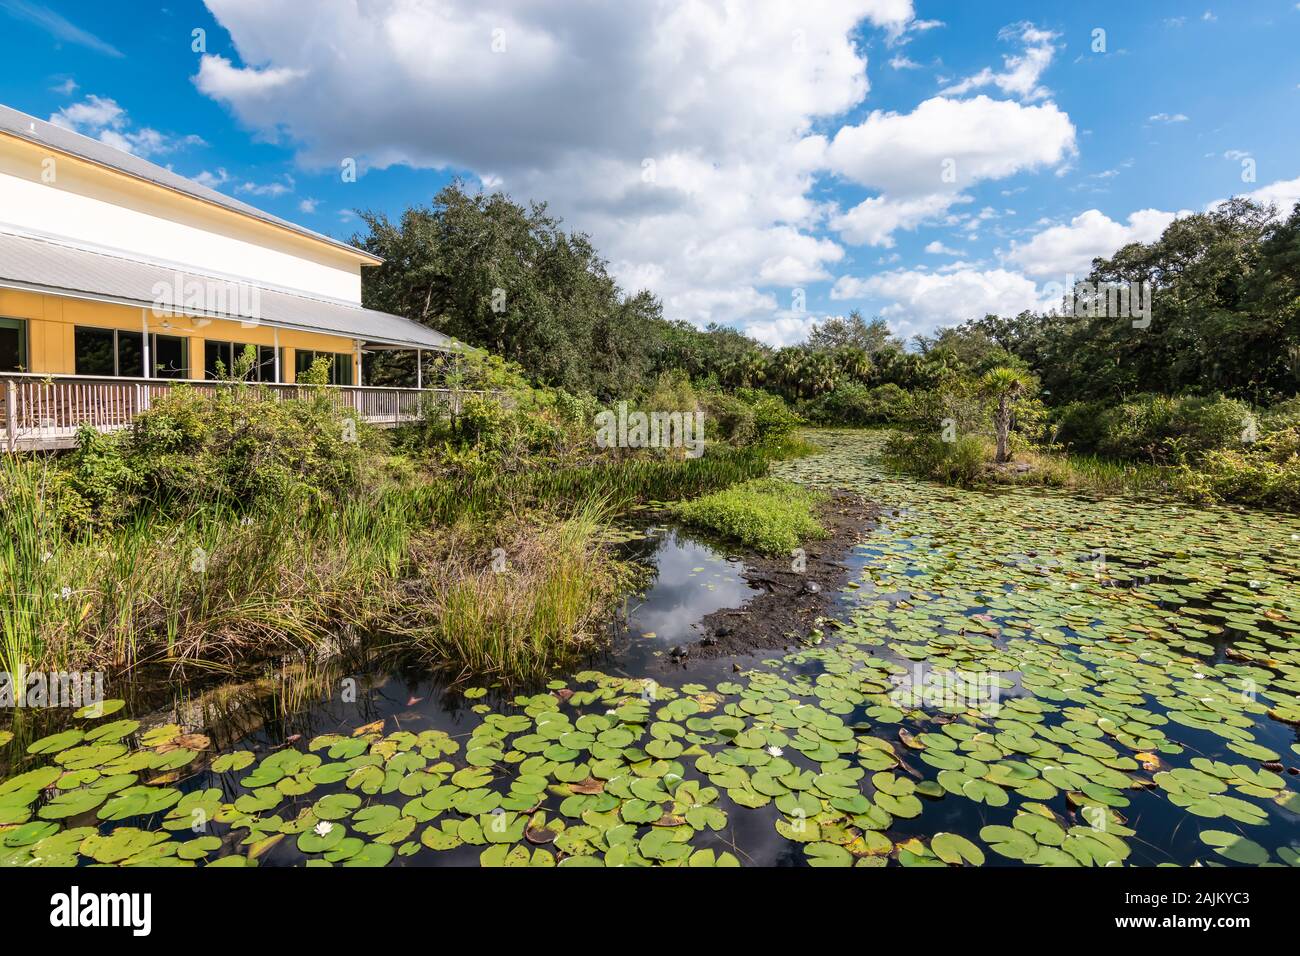 Pond with water lilies, Everglades, Florida. Stock Photo